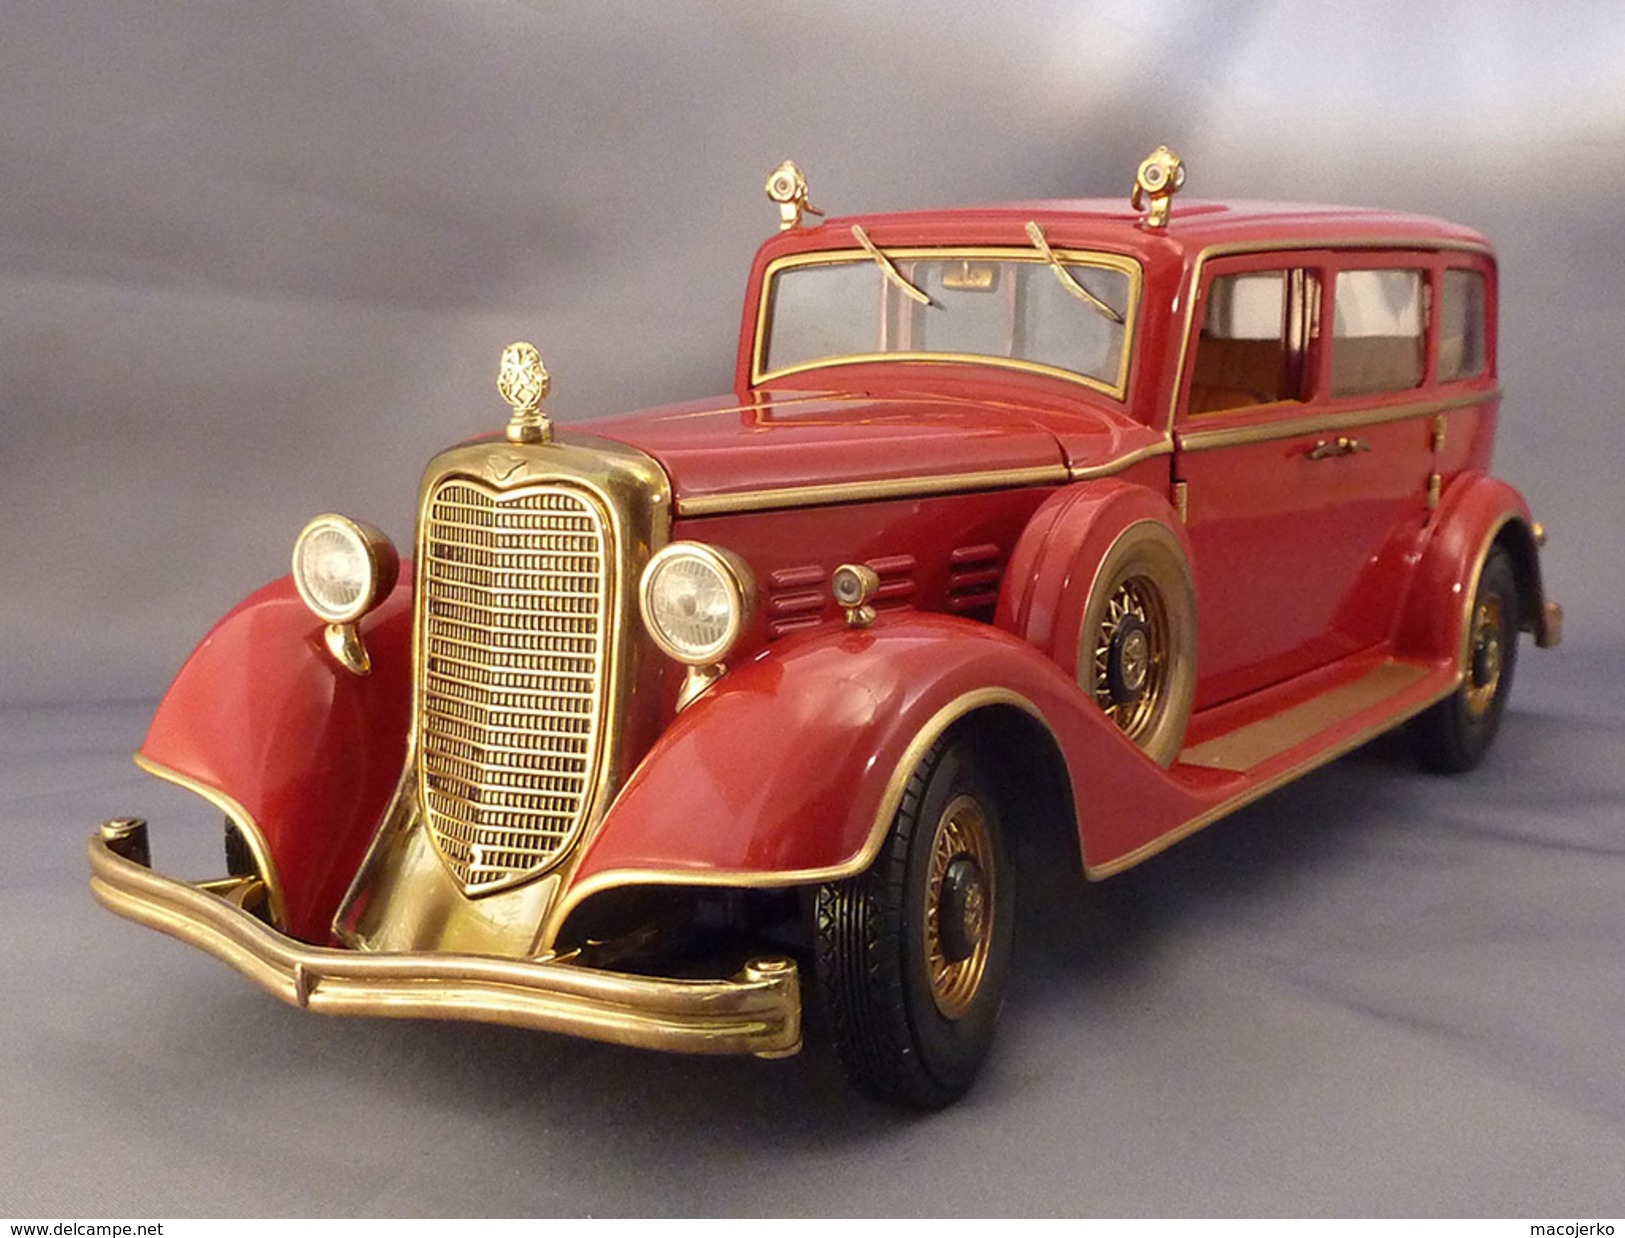 Sun Star 4100, Cadillac Tudor Deluxe, State Limousine Of Puyi, Last Emperor Of China, 1:18 - Sun Star